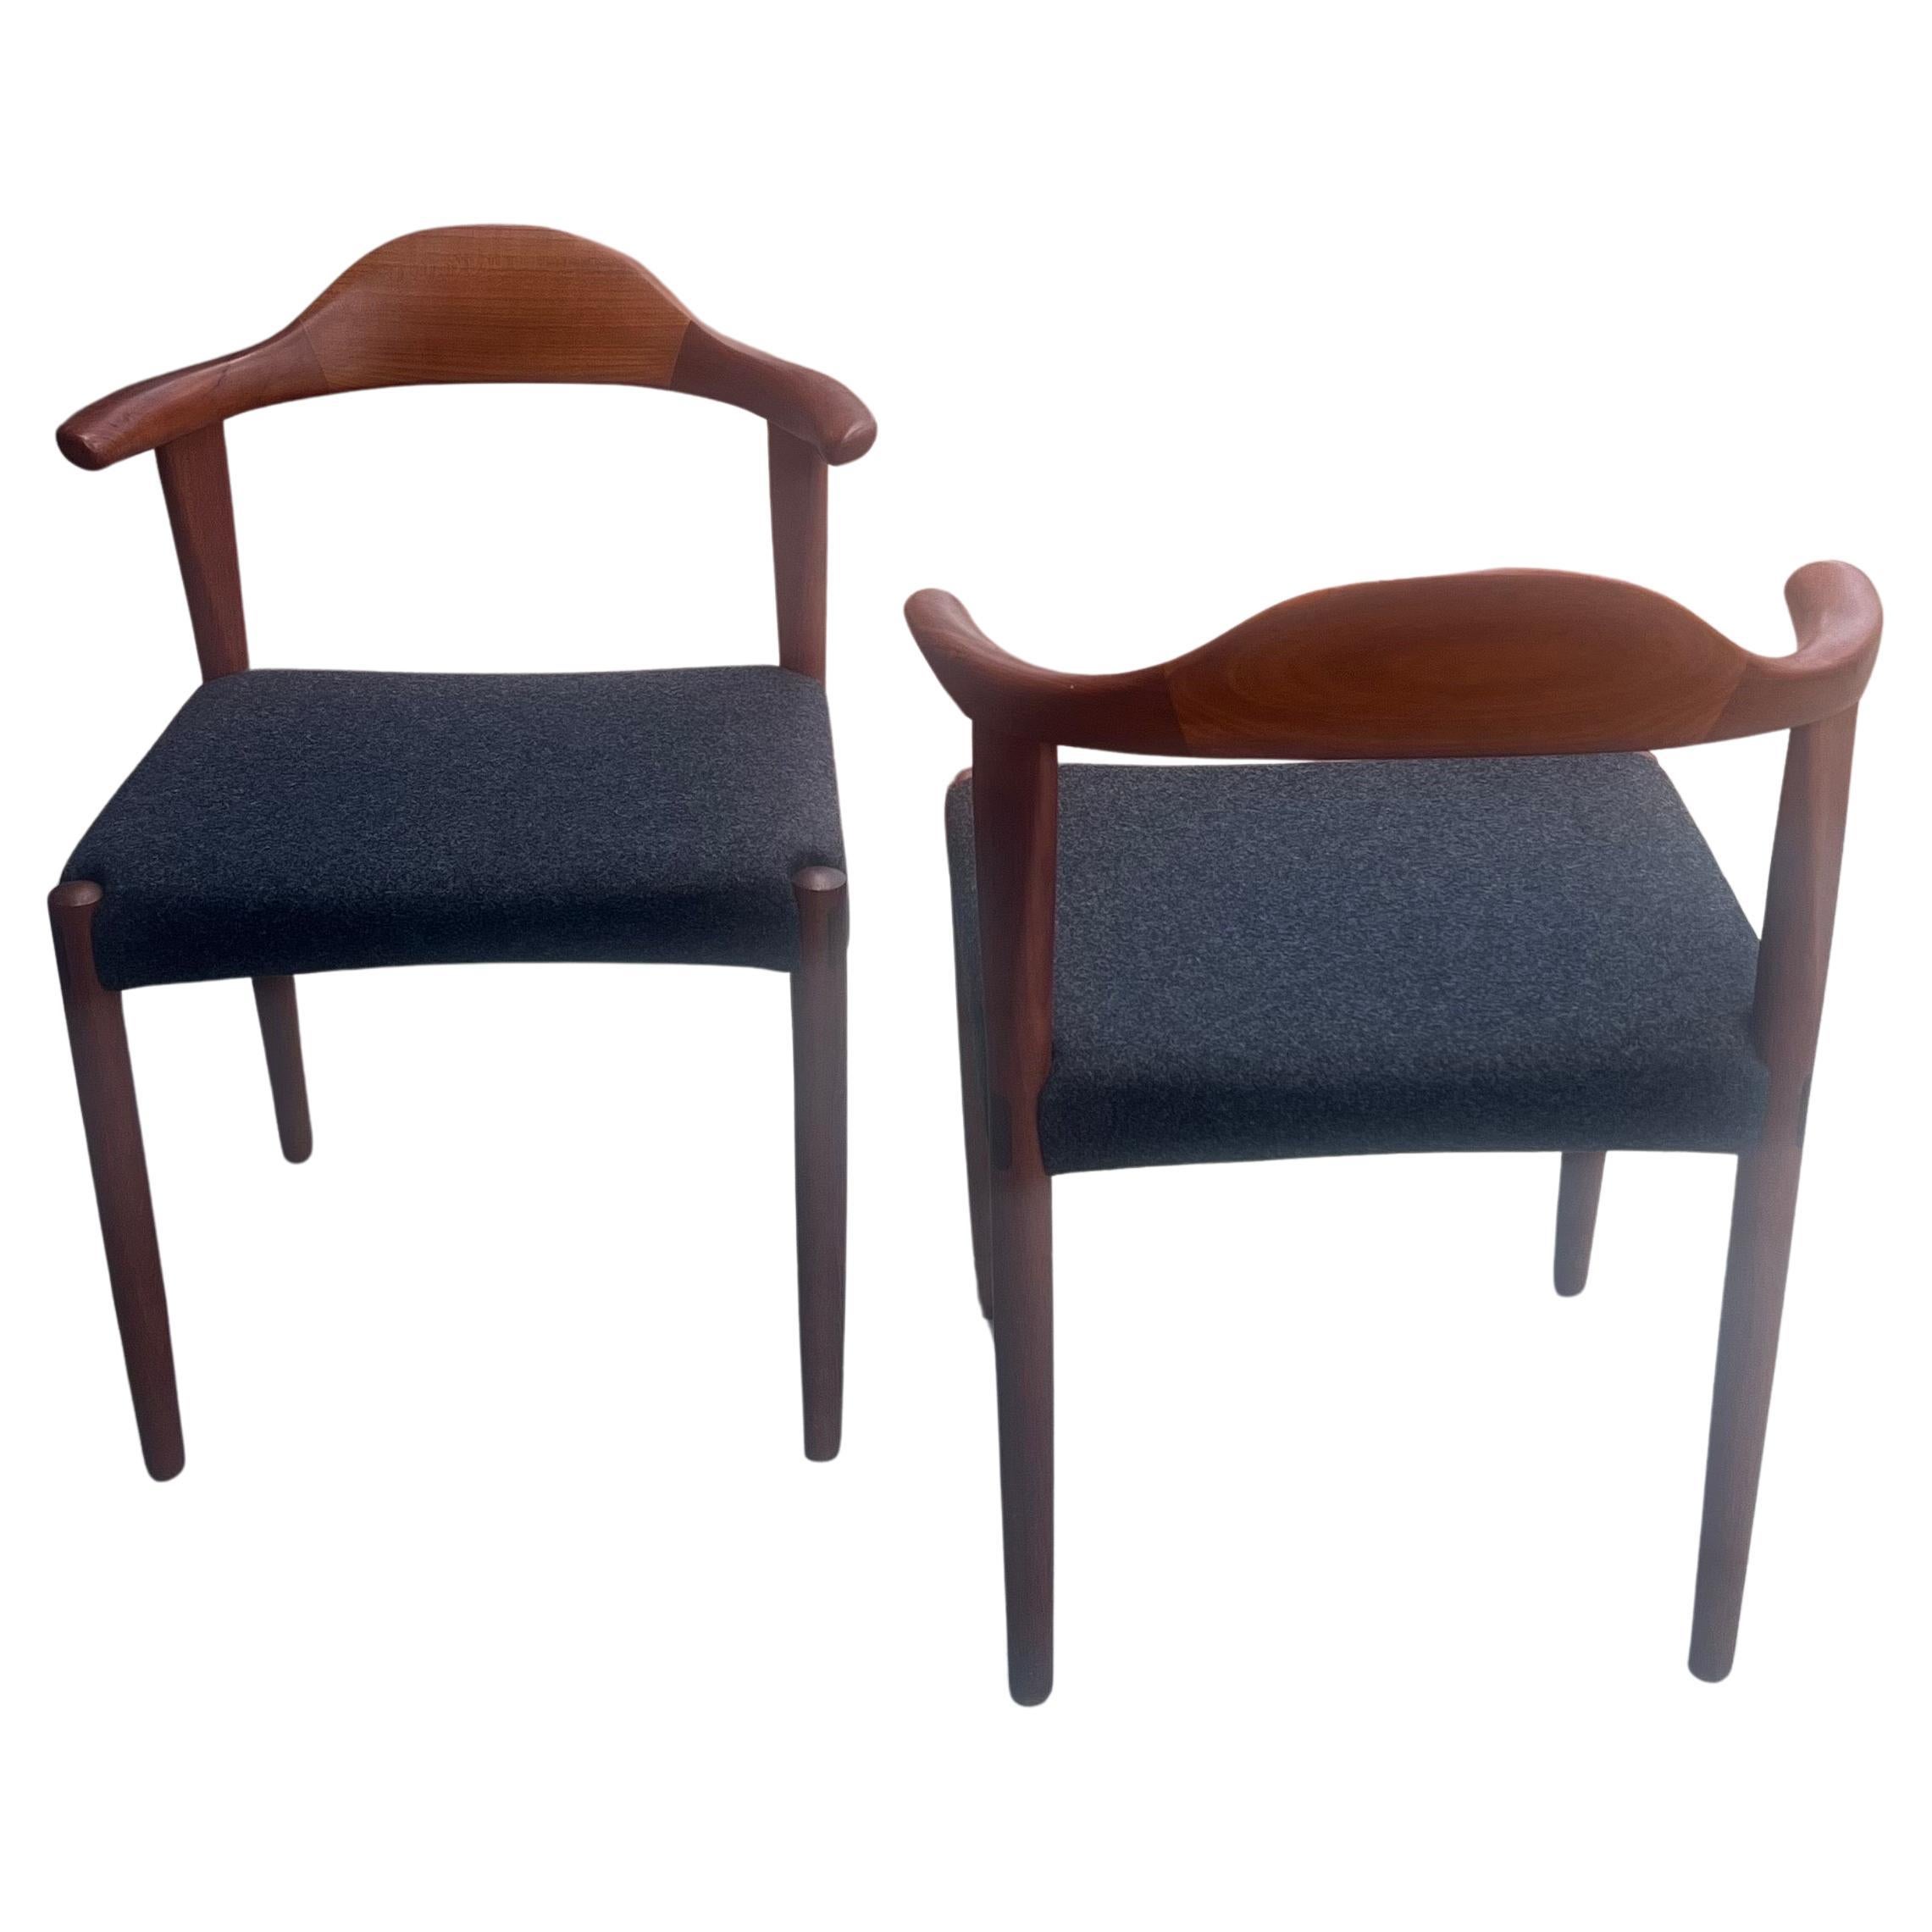 Immerse yourself in the timeless elegance of mid-century Danish design with this exquisite pair of 'Bull Horn' chairs crafted by Harry Østergaard for Randers Møbelfabrik in the 1950s. These chairs stand as a testament to the unparalleled